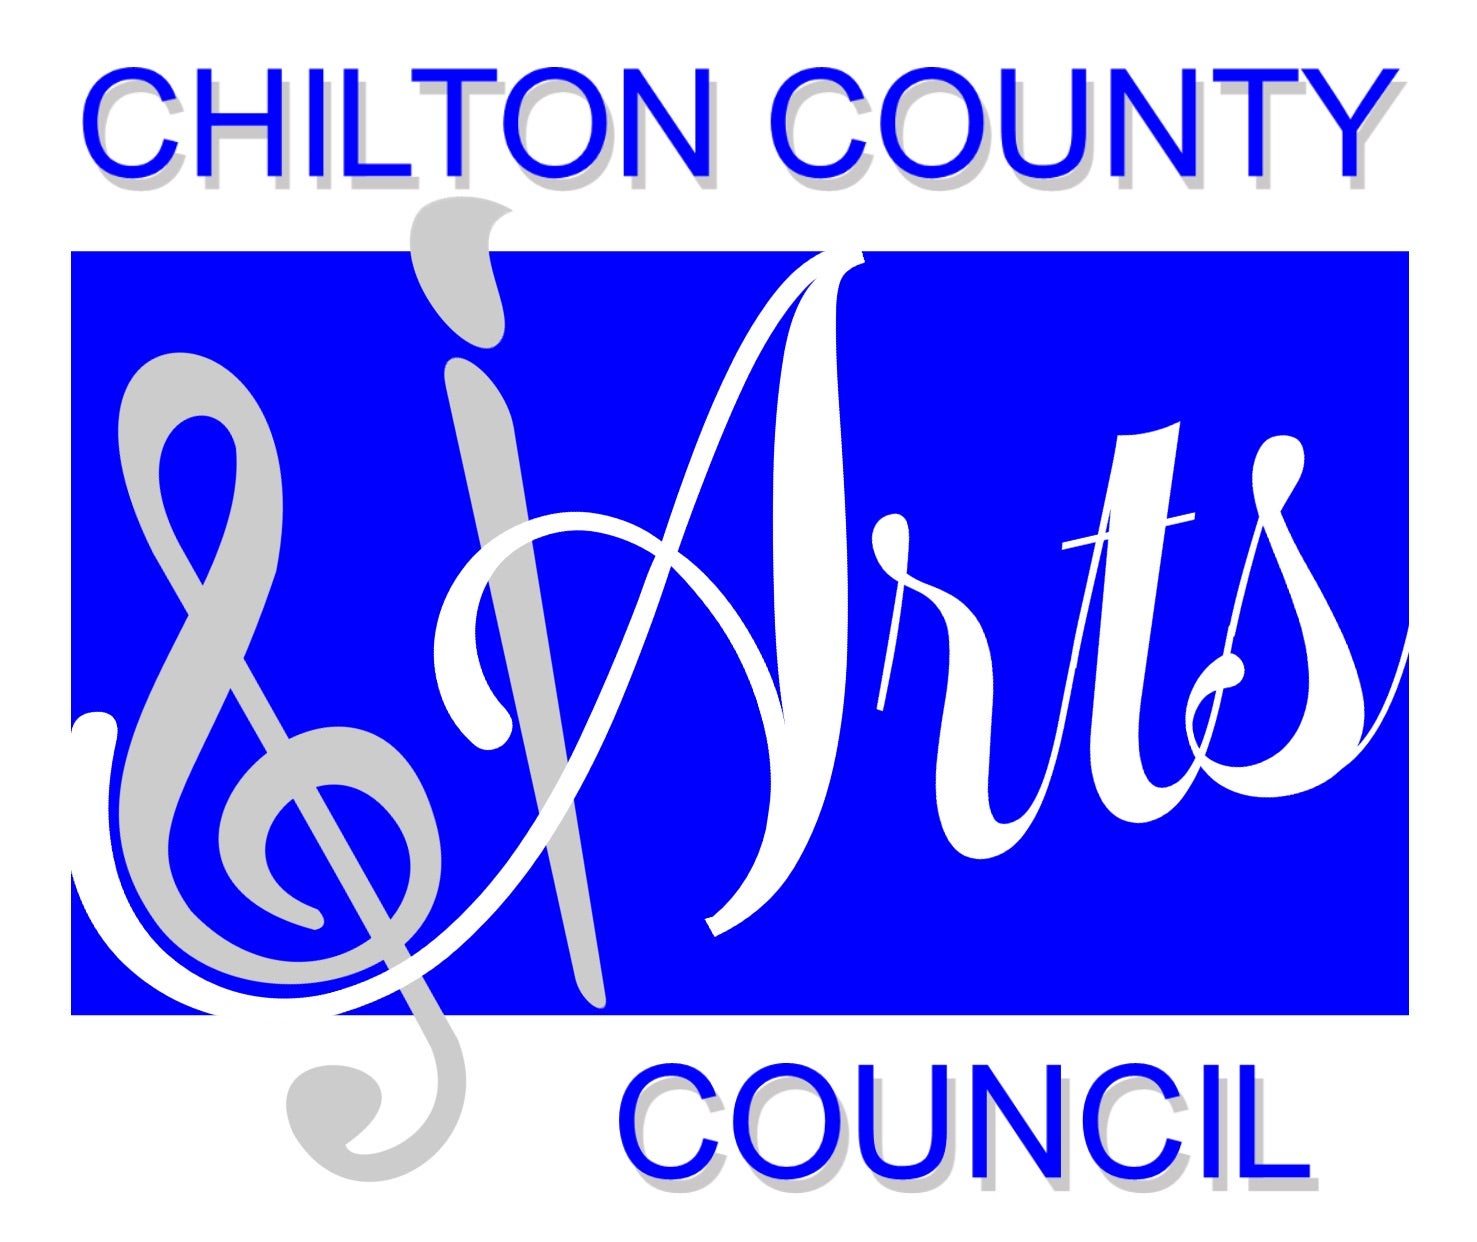 Arts Council invites local artists to participate in gallery The